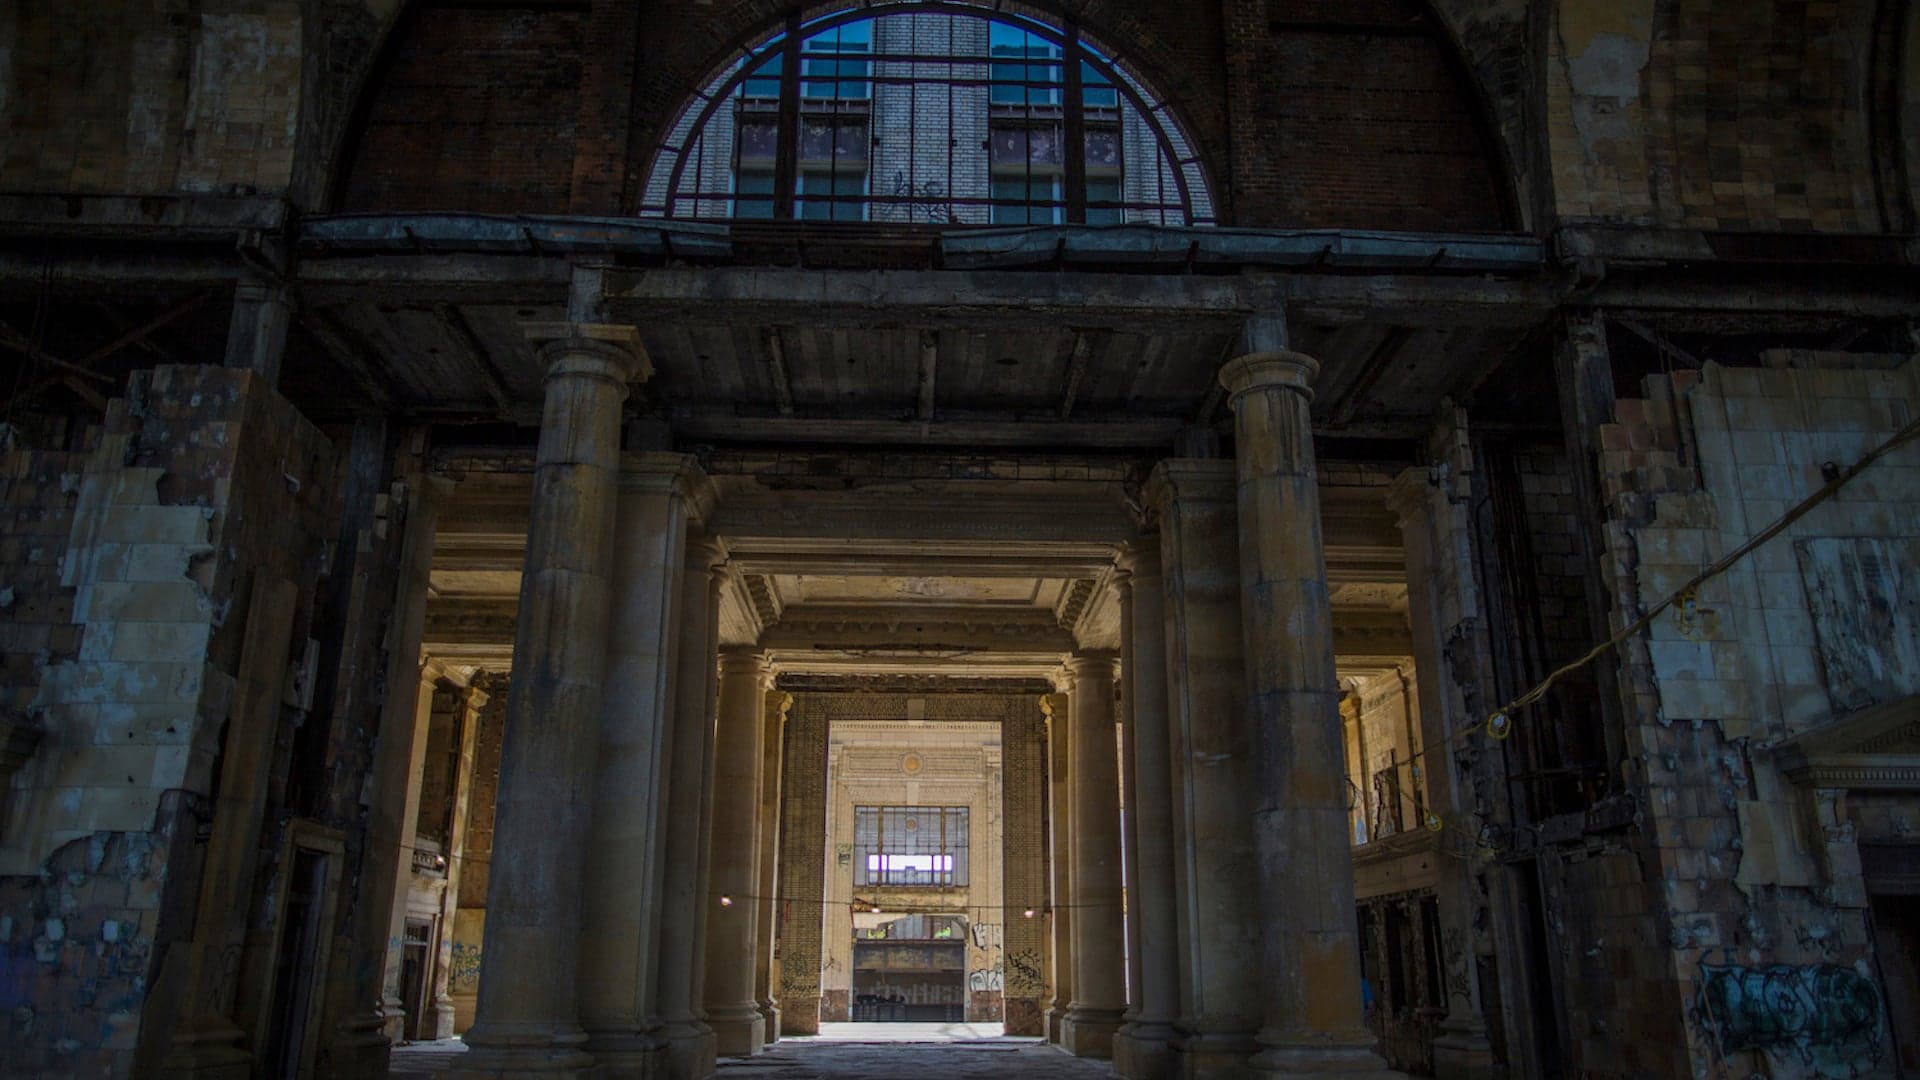 Photo Gallery: Detroit’s Michigan Central Station Through the Years